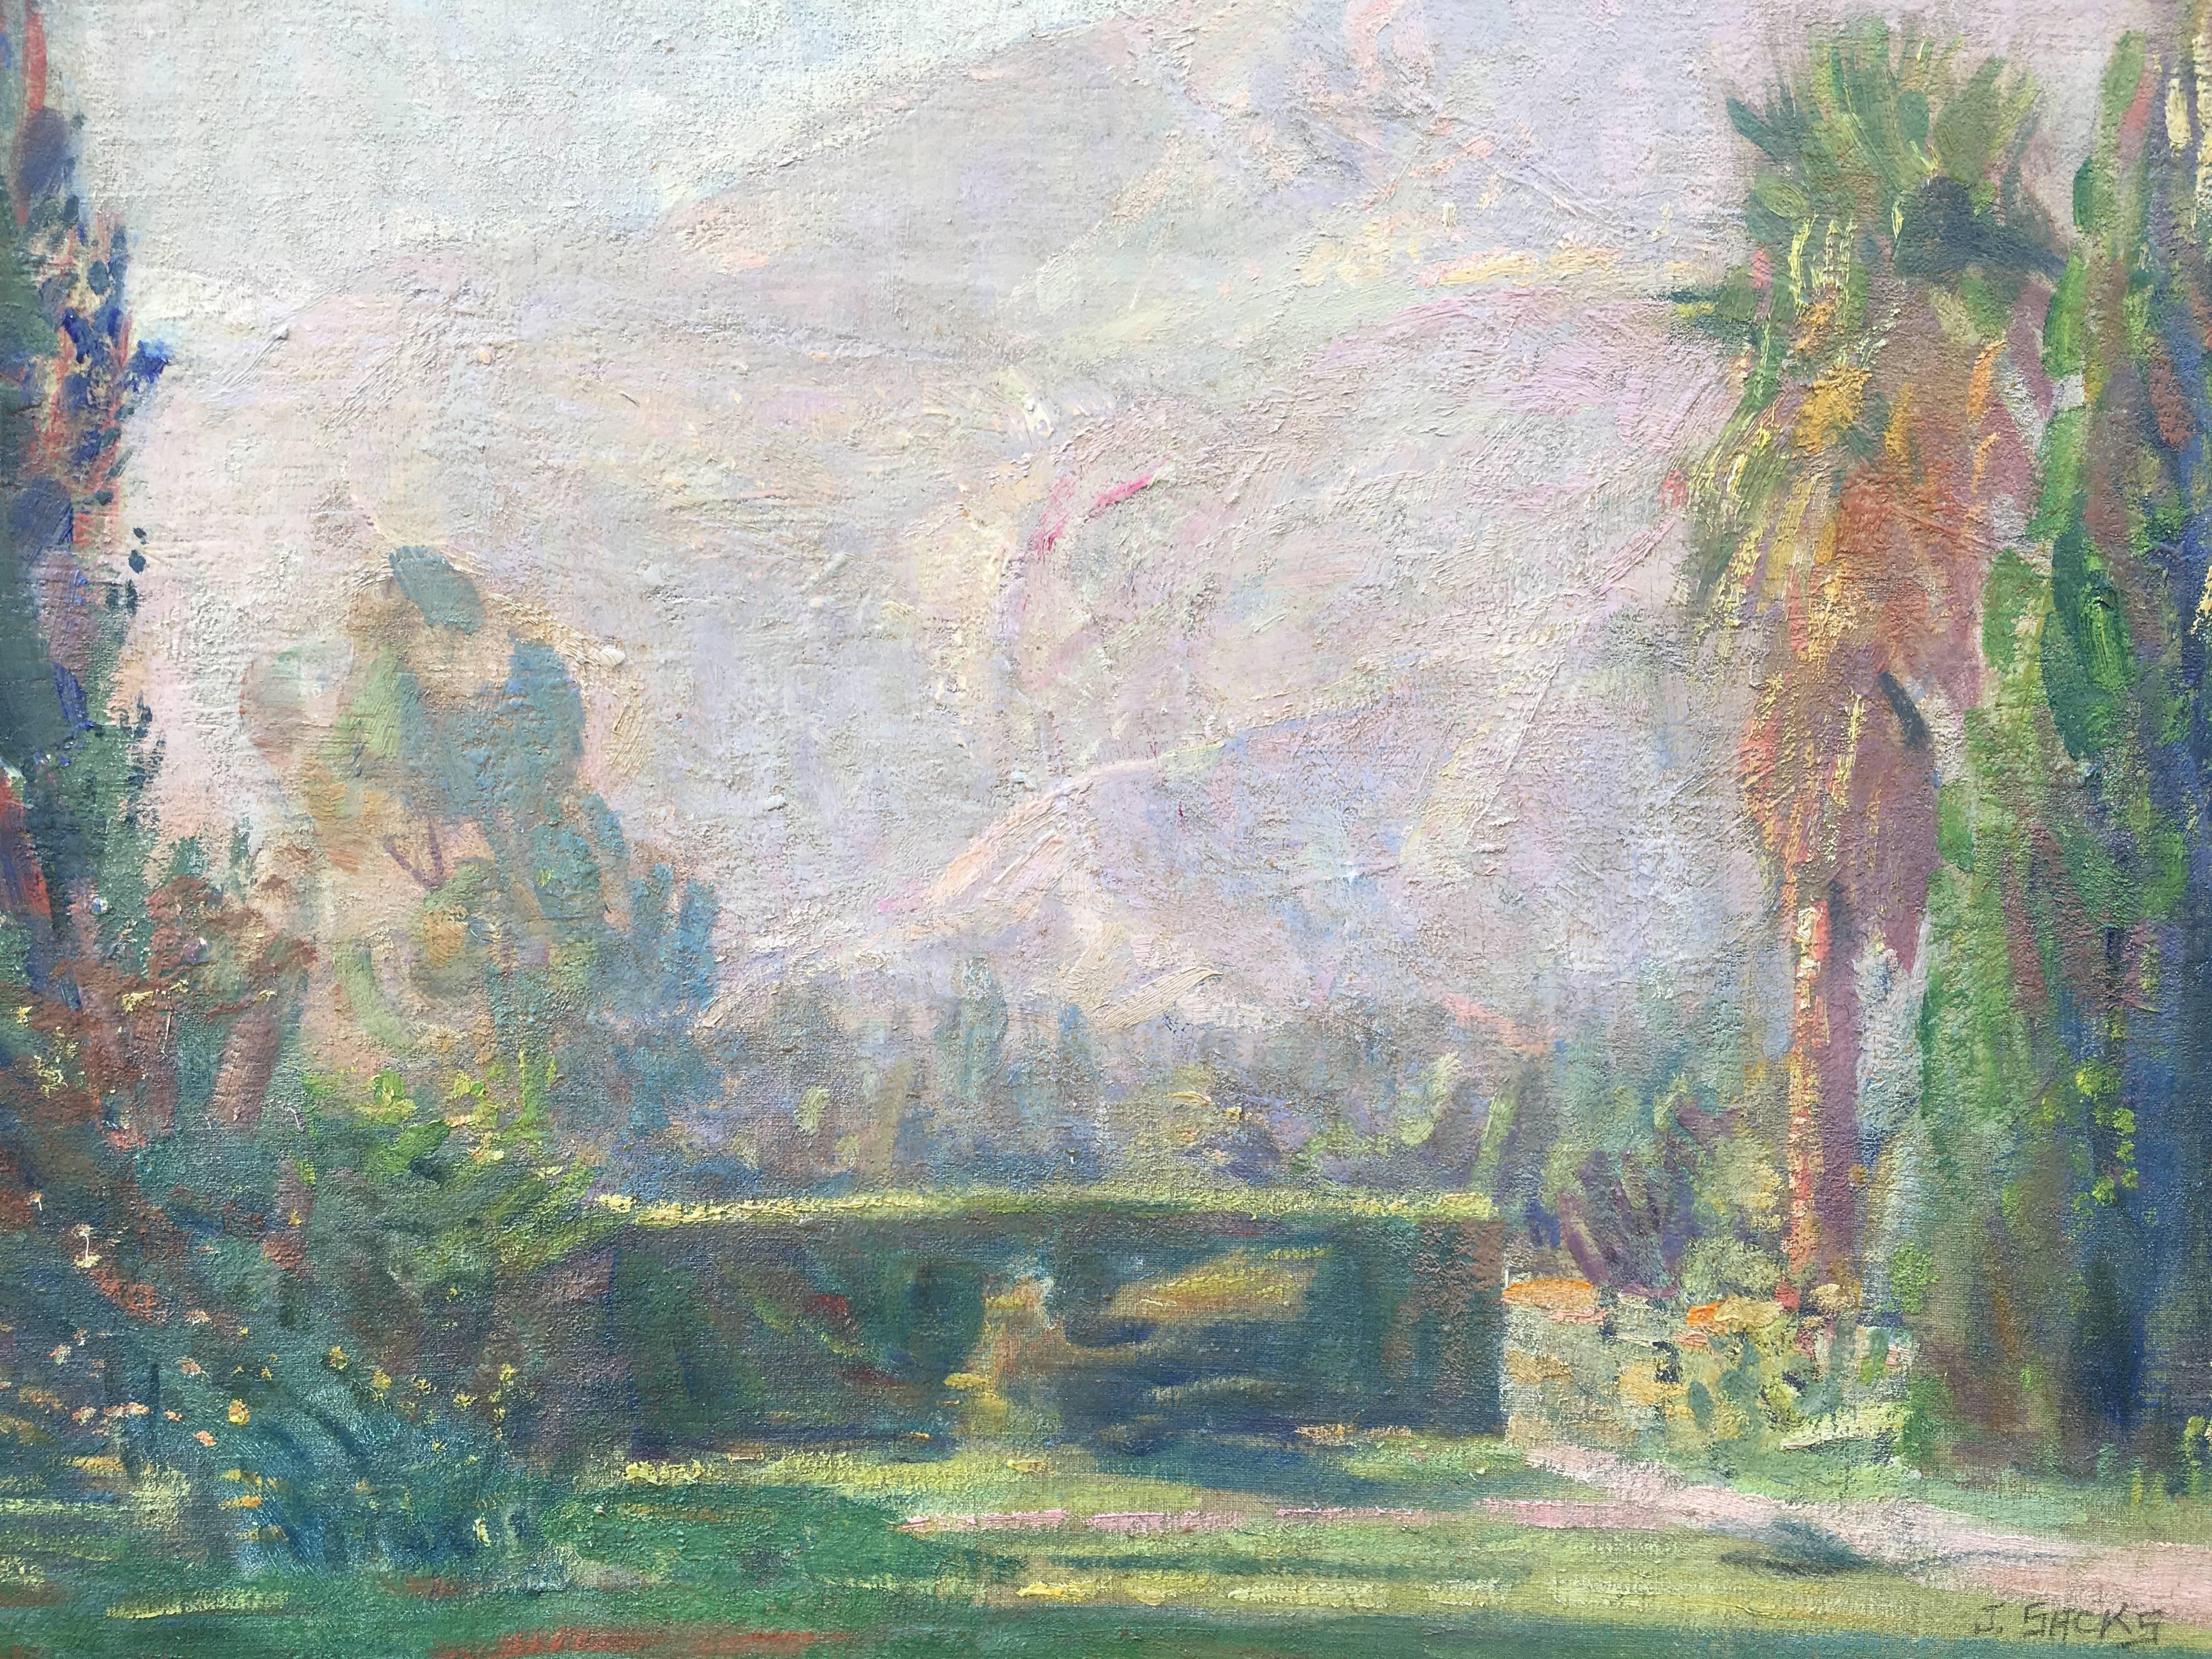 Impressionist Scene of Garden and Mt. Tamalpais in Marin County, California - American Impressionist Painting by Joseph Sacks